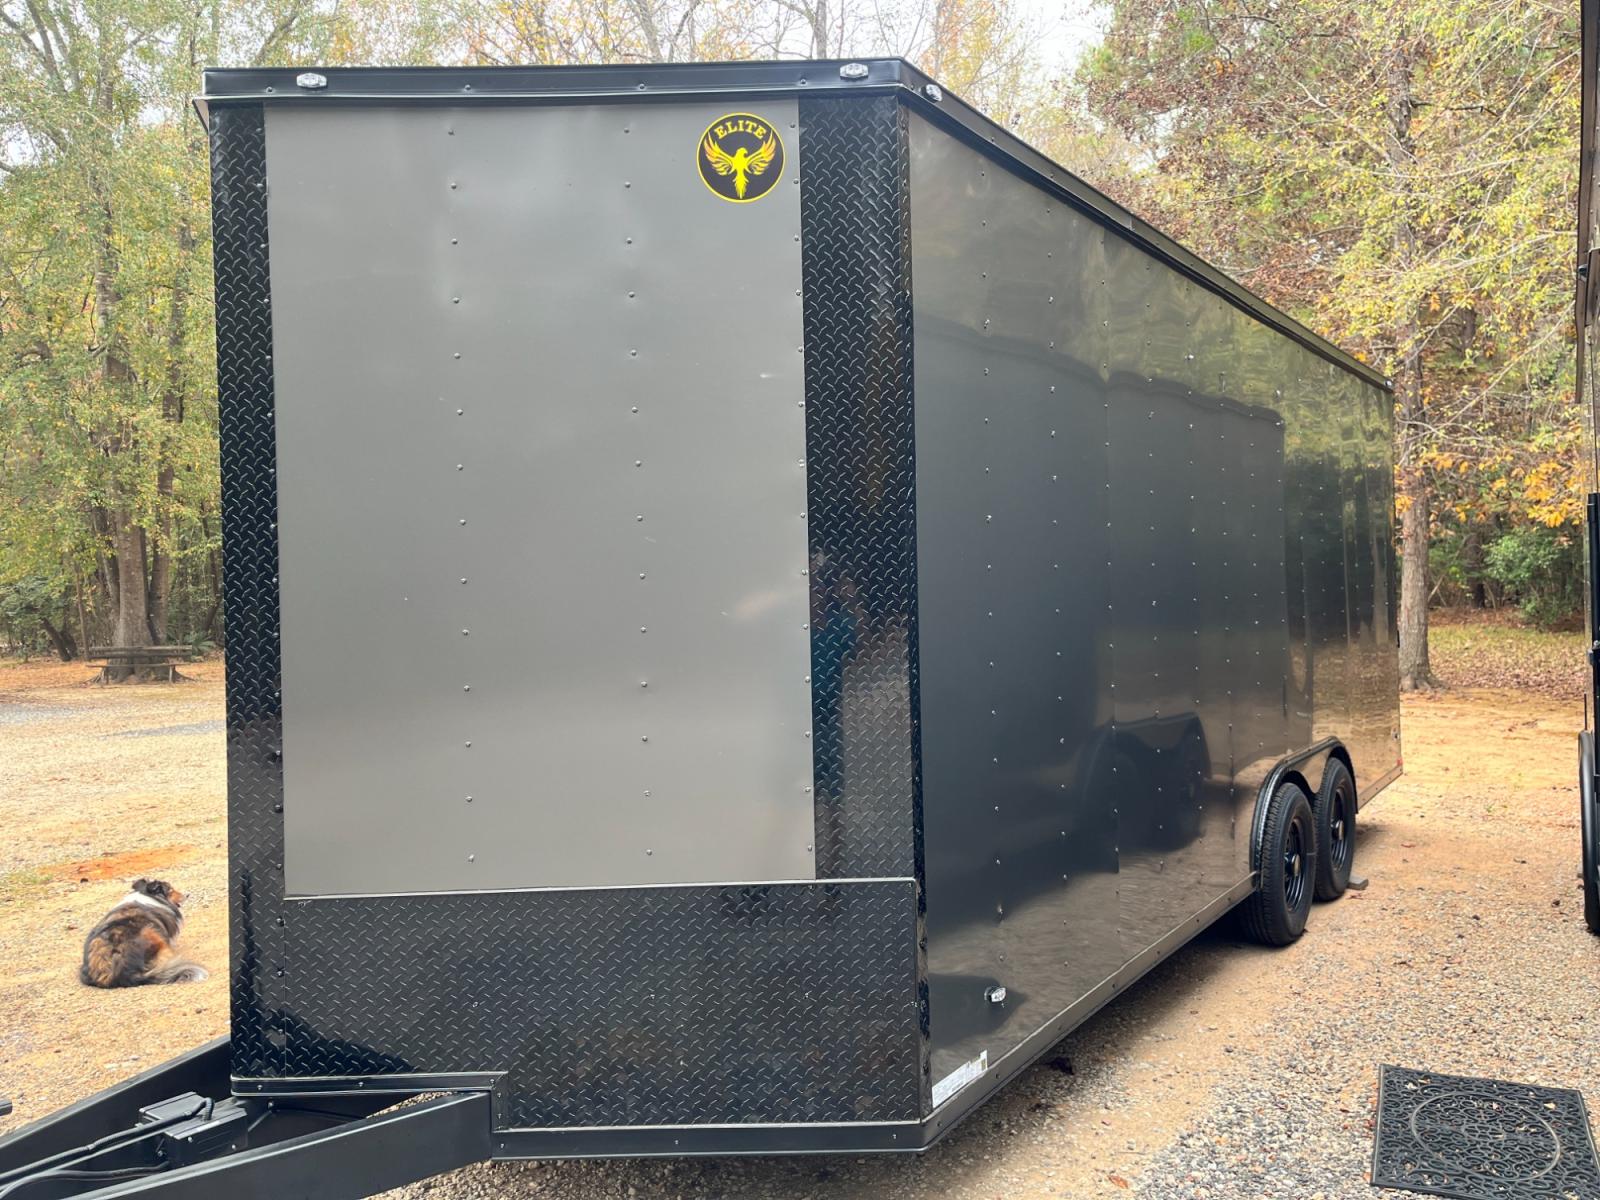 2023 .080 Charcoal Metallic w/Black Out Pkg. Elite Cargo 8.5ft X 20ft Tandem , located at 1330 Rainey Rd., Macon, 31220, (478) 960-1044, 32.845638, -83.778687 - 8.5ft X 20ft Tandem Enclosed Cargo Trailer! Made by Elite Trailers, in Tifton, Ga! This is the Best Quality Trailer Built Today! .080 Thick Charcoal Metallic Skin, with the Black Out Pkg Trim! One Piece Rubber Roof, on top of 7/16